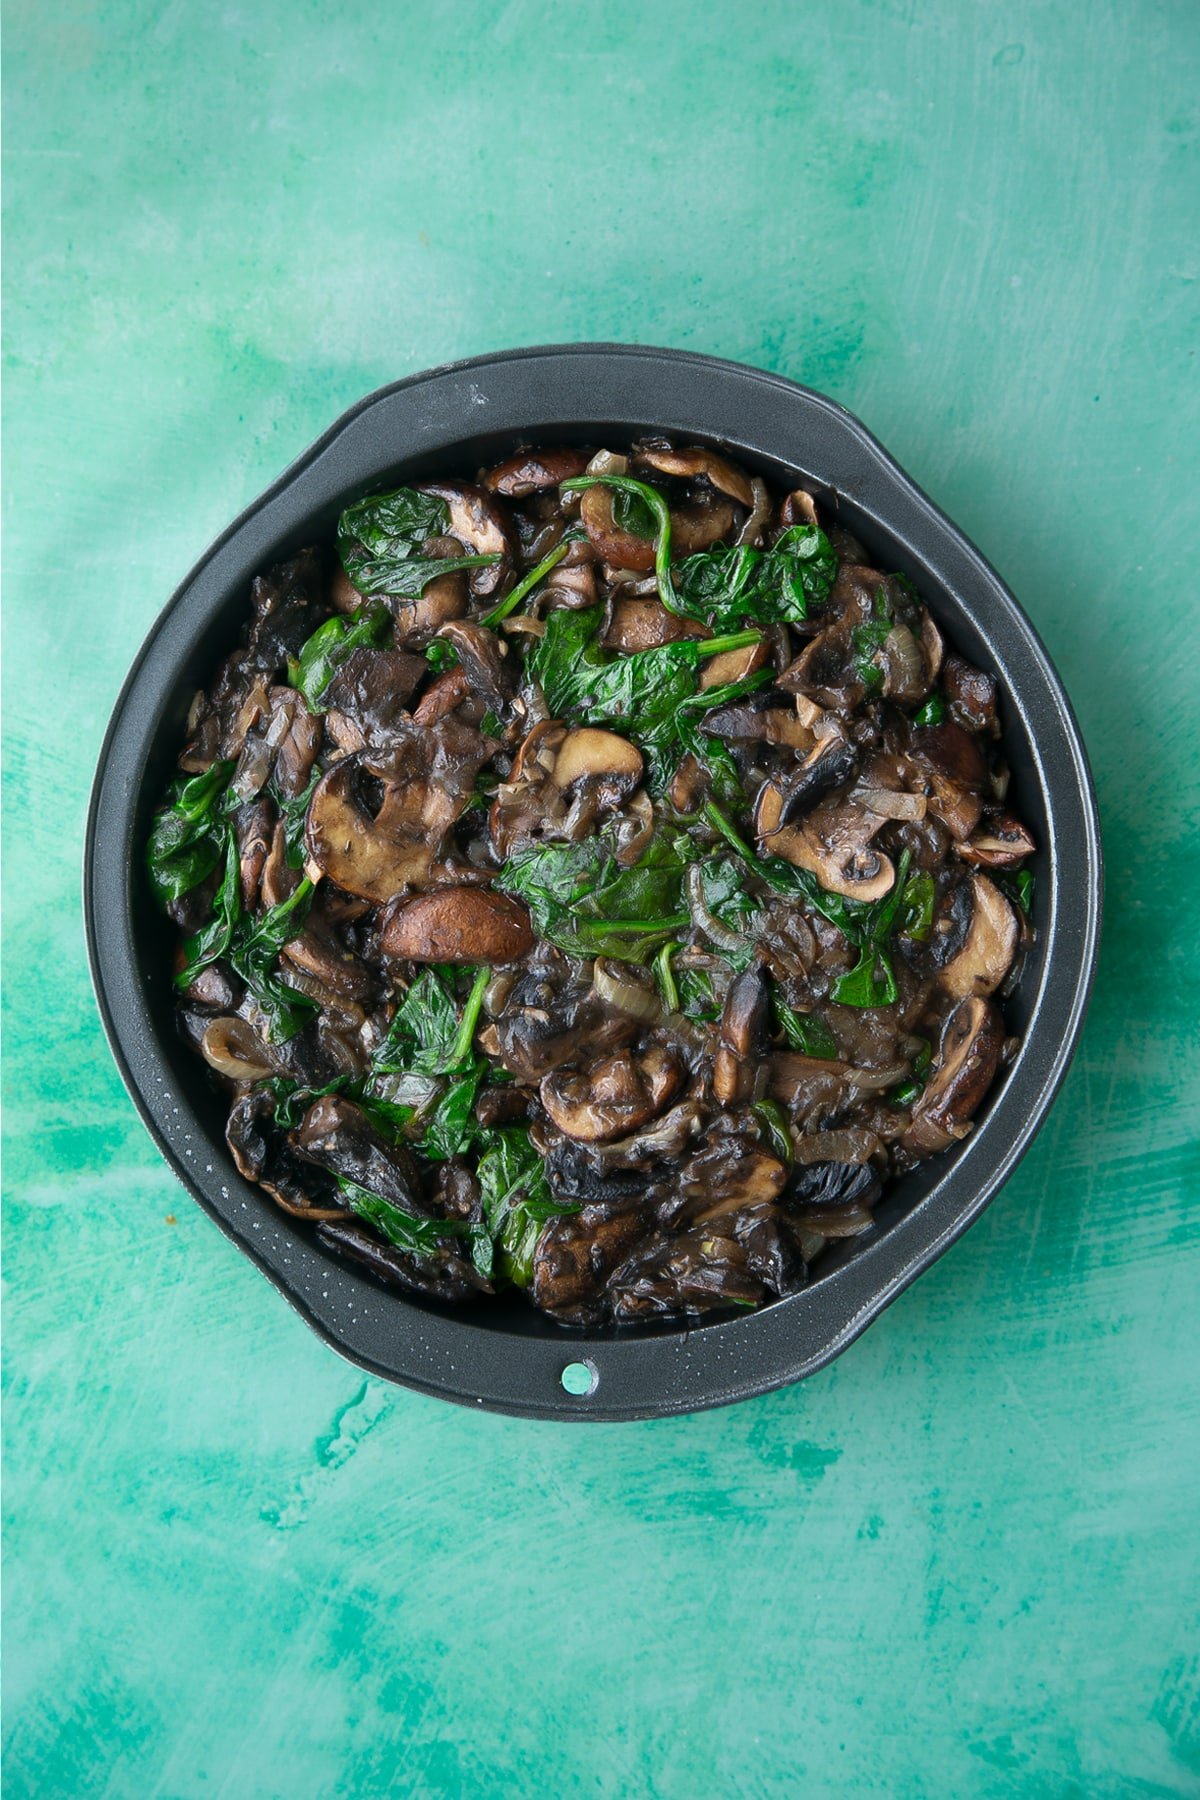 cooked onions, mushrooms and spinach in a white wine sauce in a pie dish.